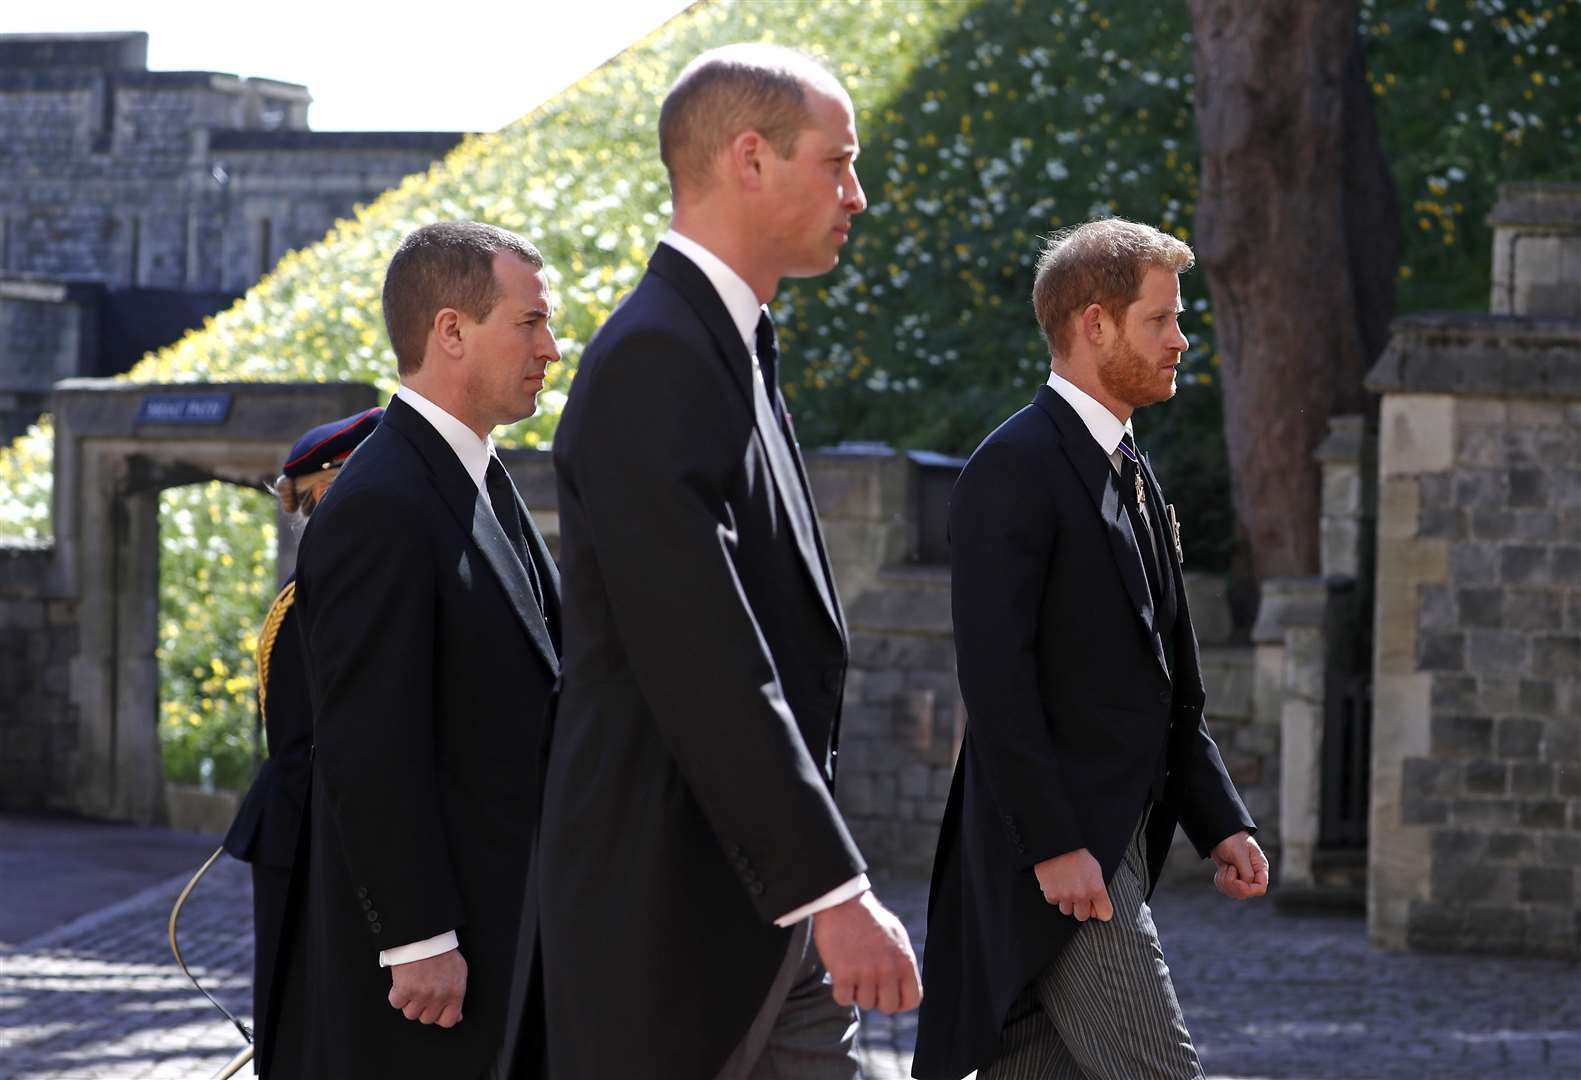 William and Harry were seen talking after the service had ended (Alastair Grant/PA)